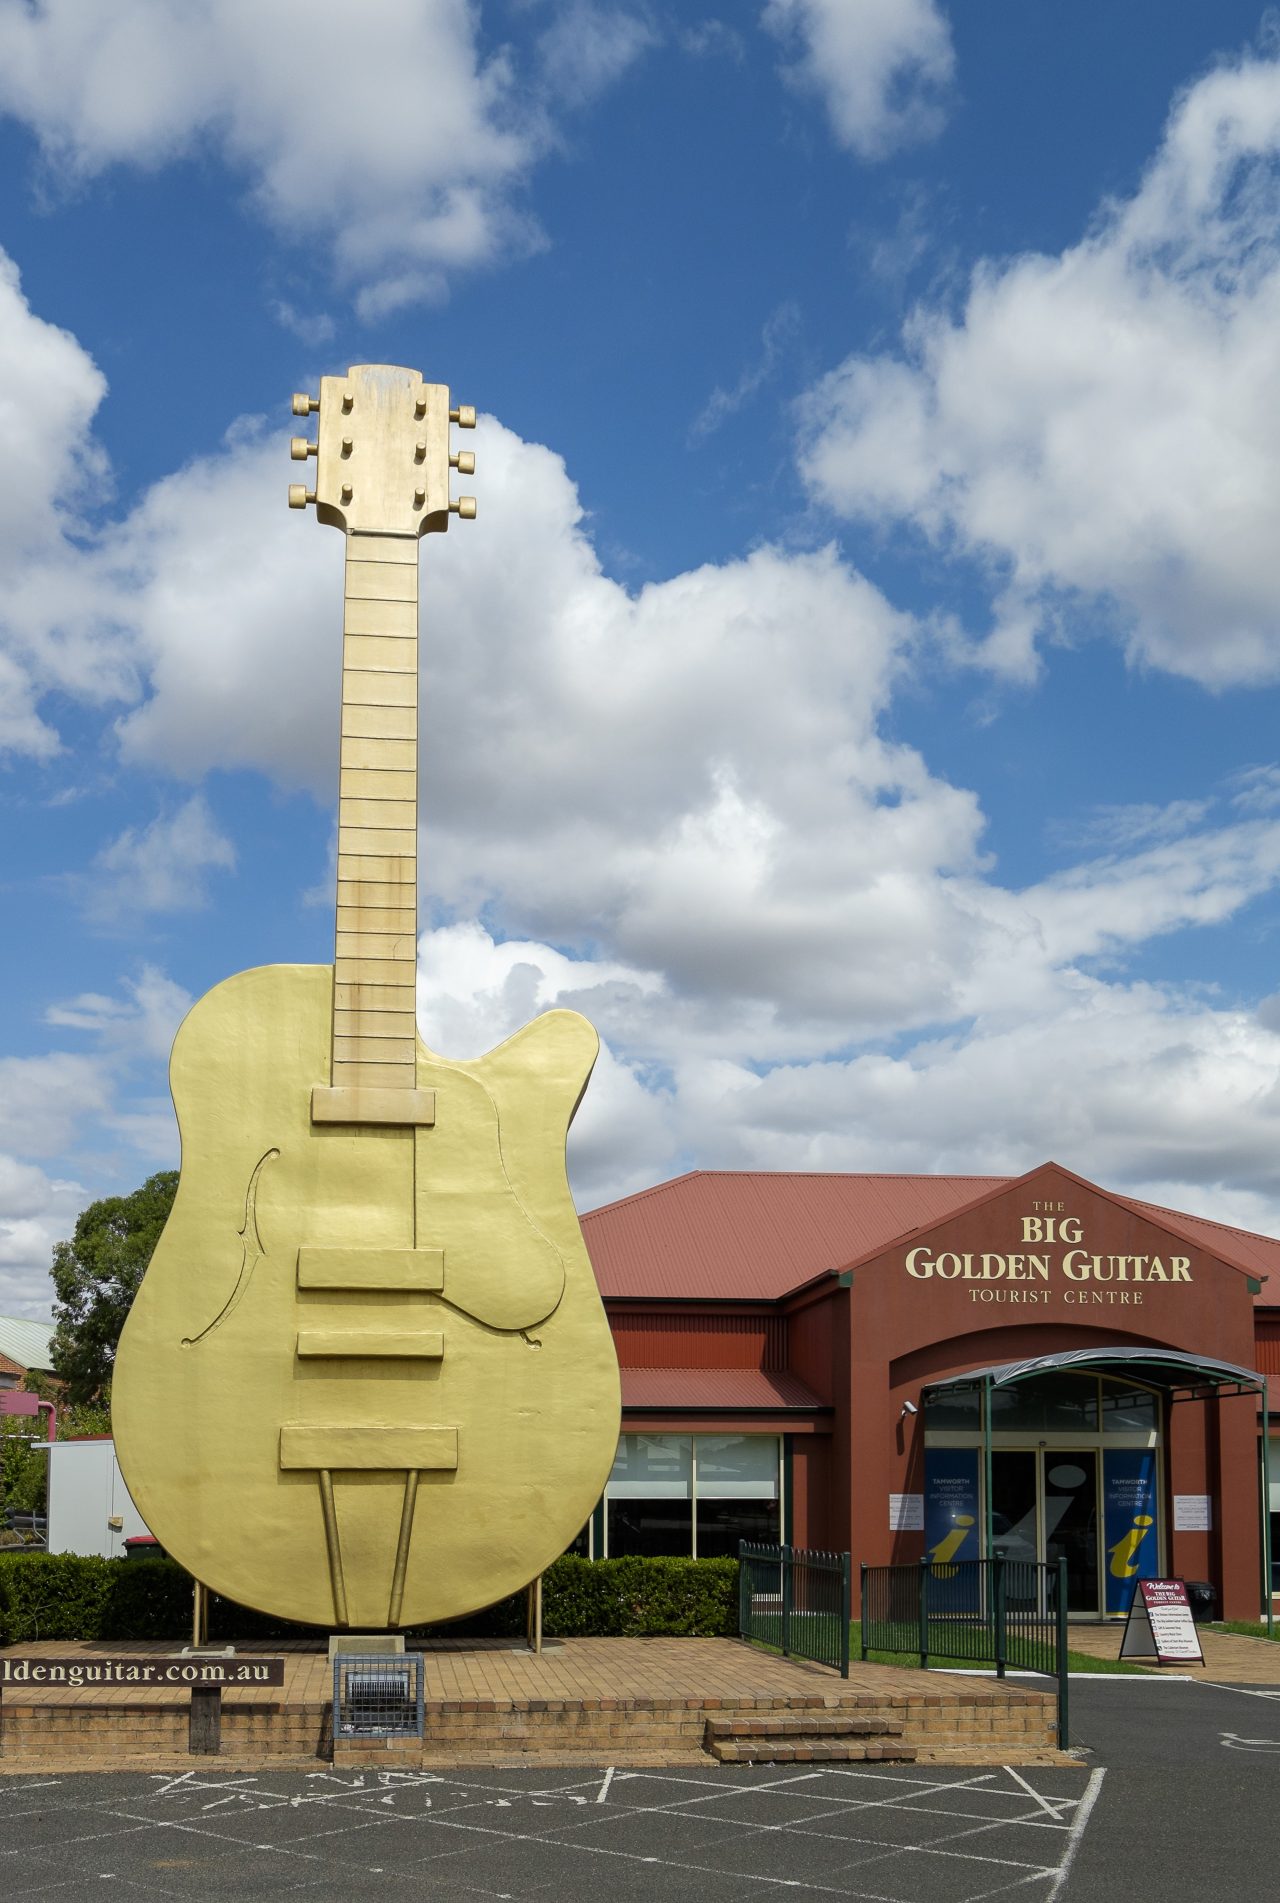 The Big Golden Guitar on display outside the Big Golden Guitar Tourist Centre in Tamworth.